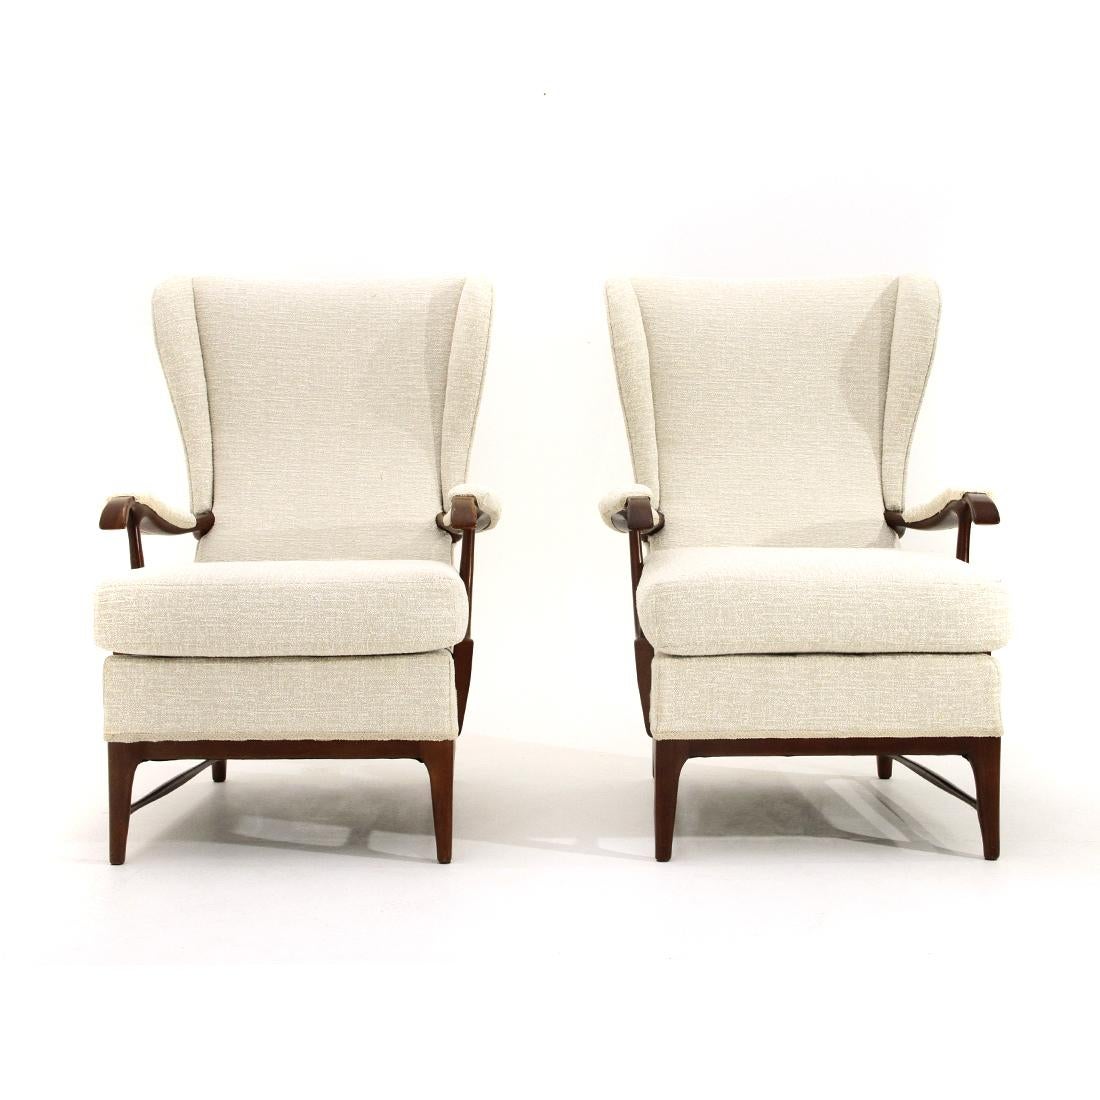 Mid-Century Modern Pair of armchairs in ivory white fabric by Framar, 1950s For Sale